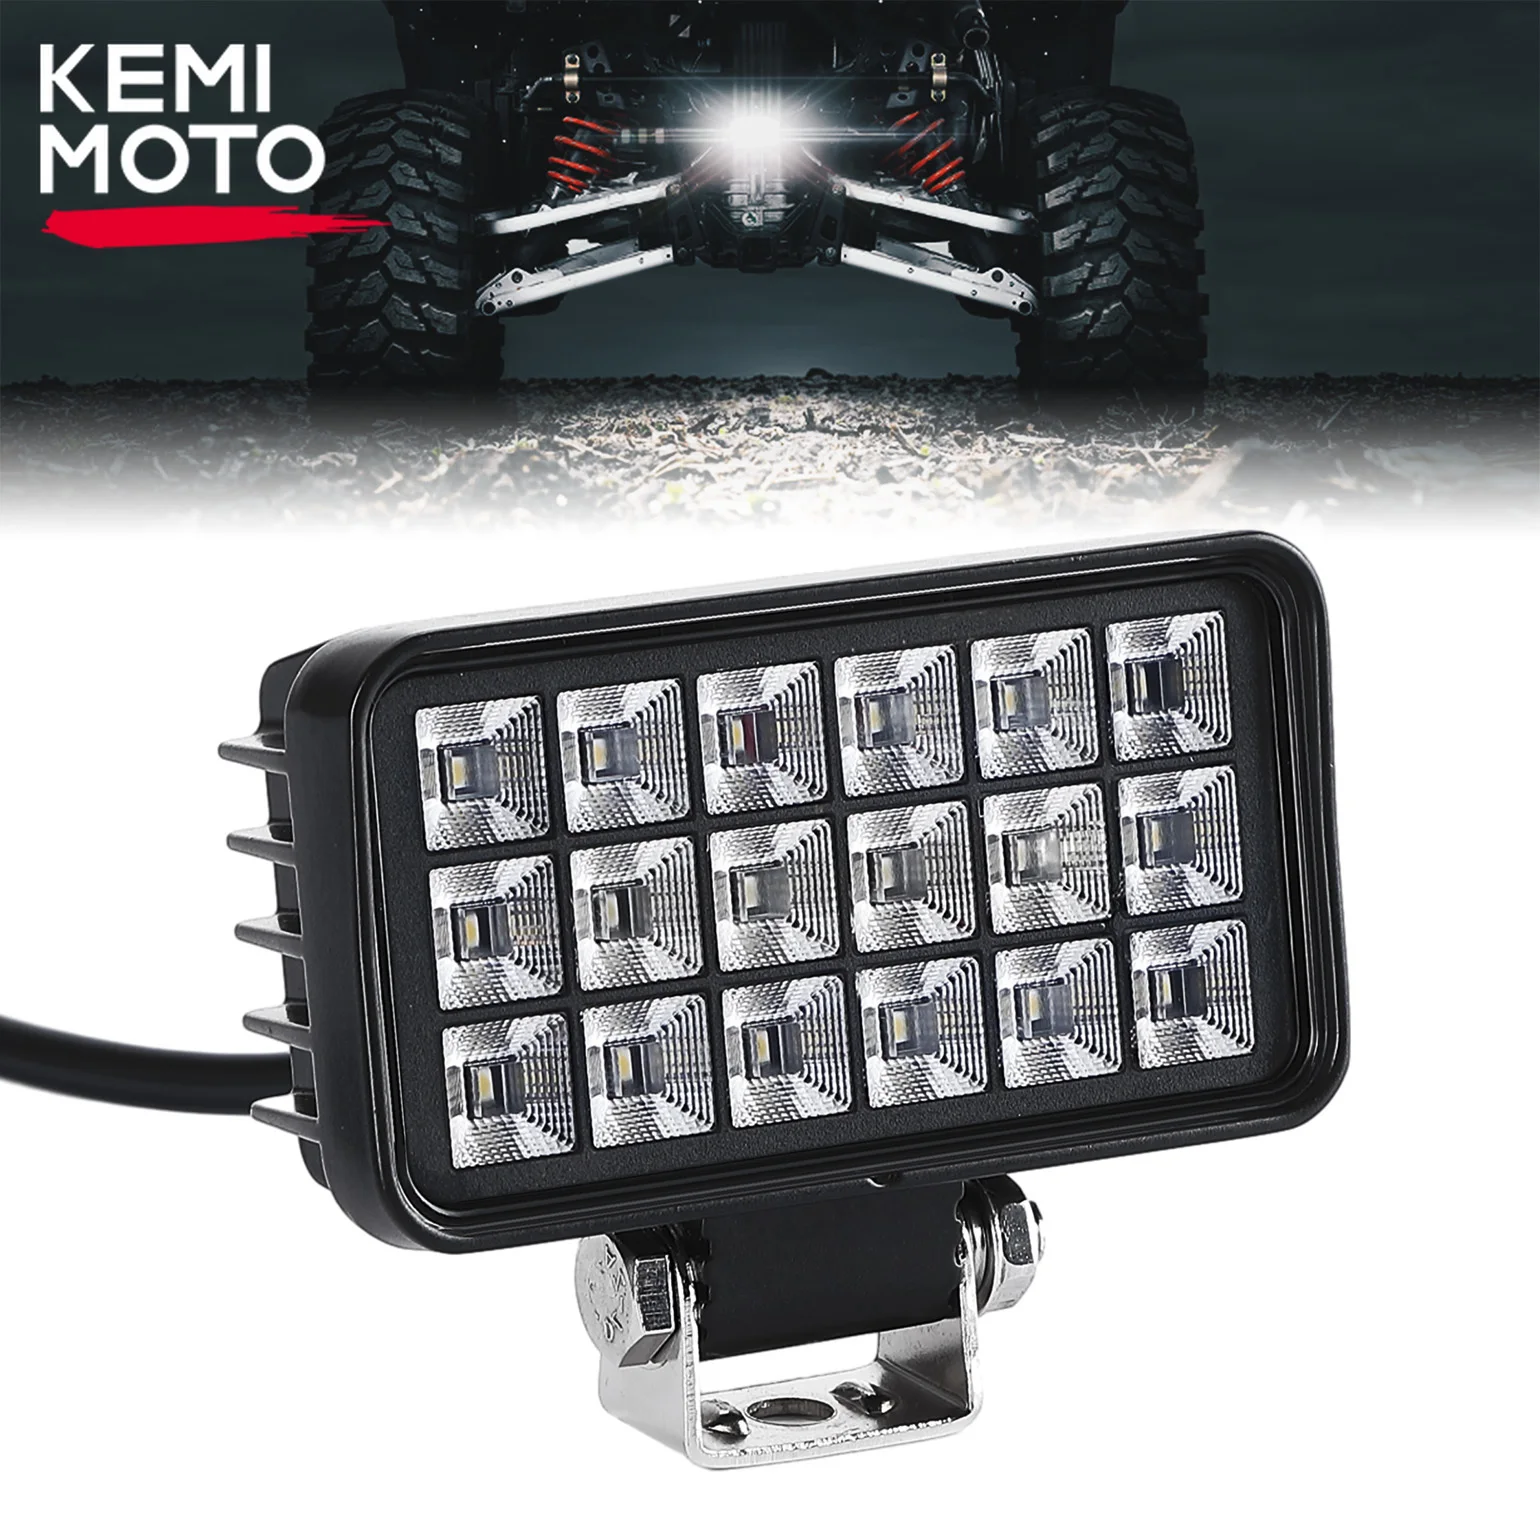 KEMIMOTO 36W Reverse Rear LED Light Kit Compatible with Polaris Ranger 1000 XP/ 1000 XP Crew 2018-2024 Backup Light with Switch new rear view camera reverse camera parking assist backup camera for kia rio 2018 2020 95760 h8000